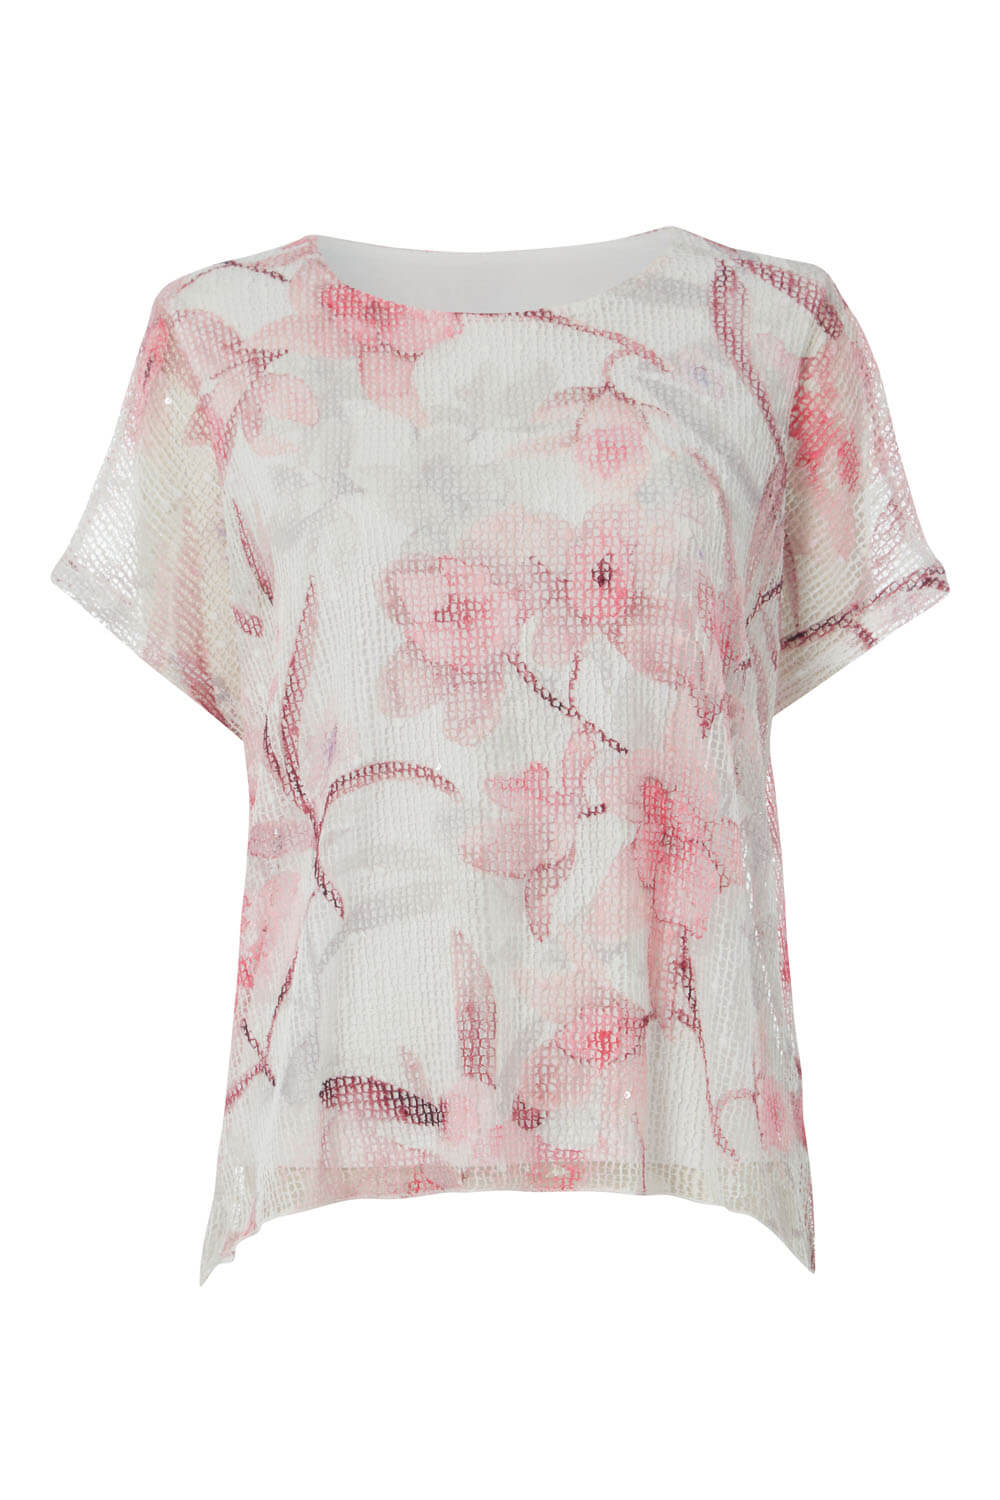 PINK Mesh Overlay Floral Top, Image 5 of 5